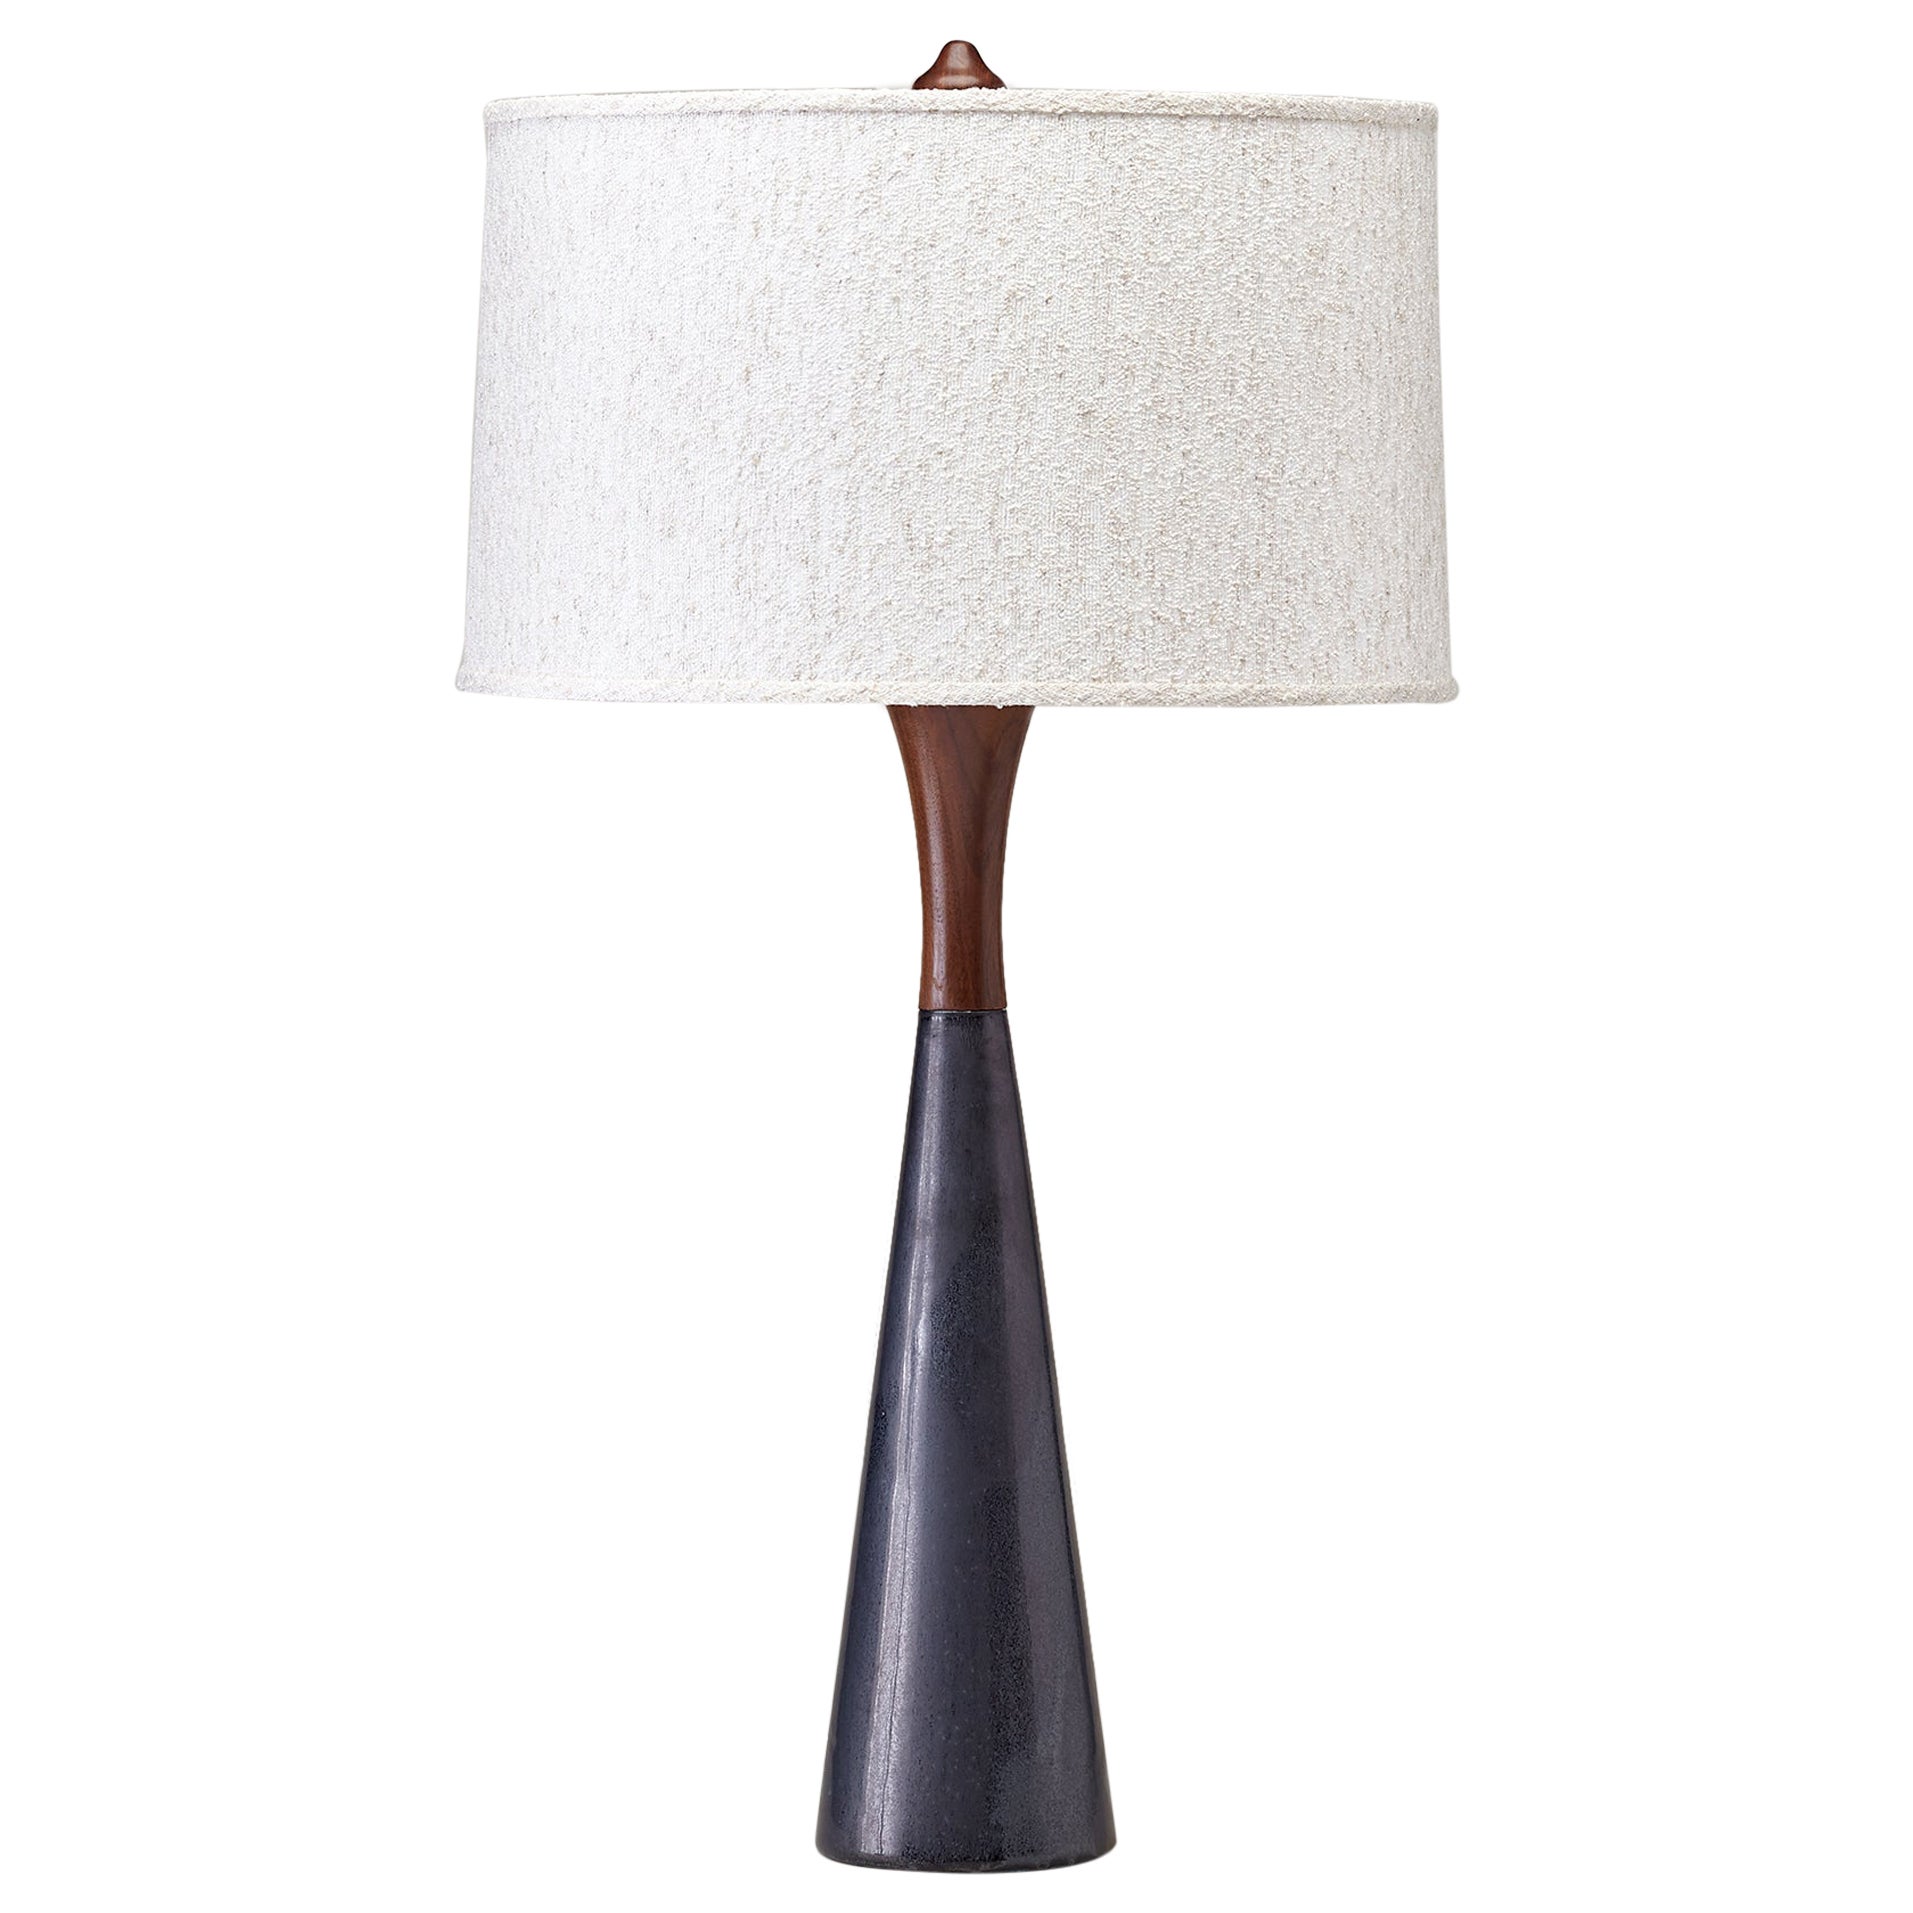 Handcrafted Mid-Century Modern Inspired Tall Porcelain and Walnut Table Lamp